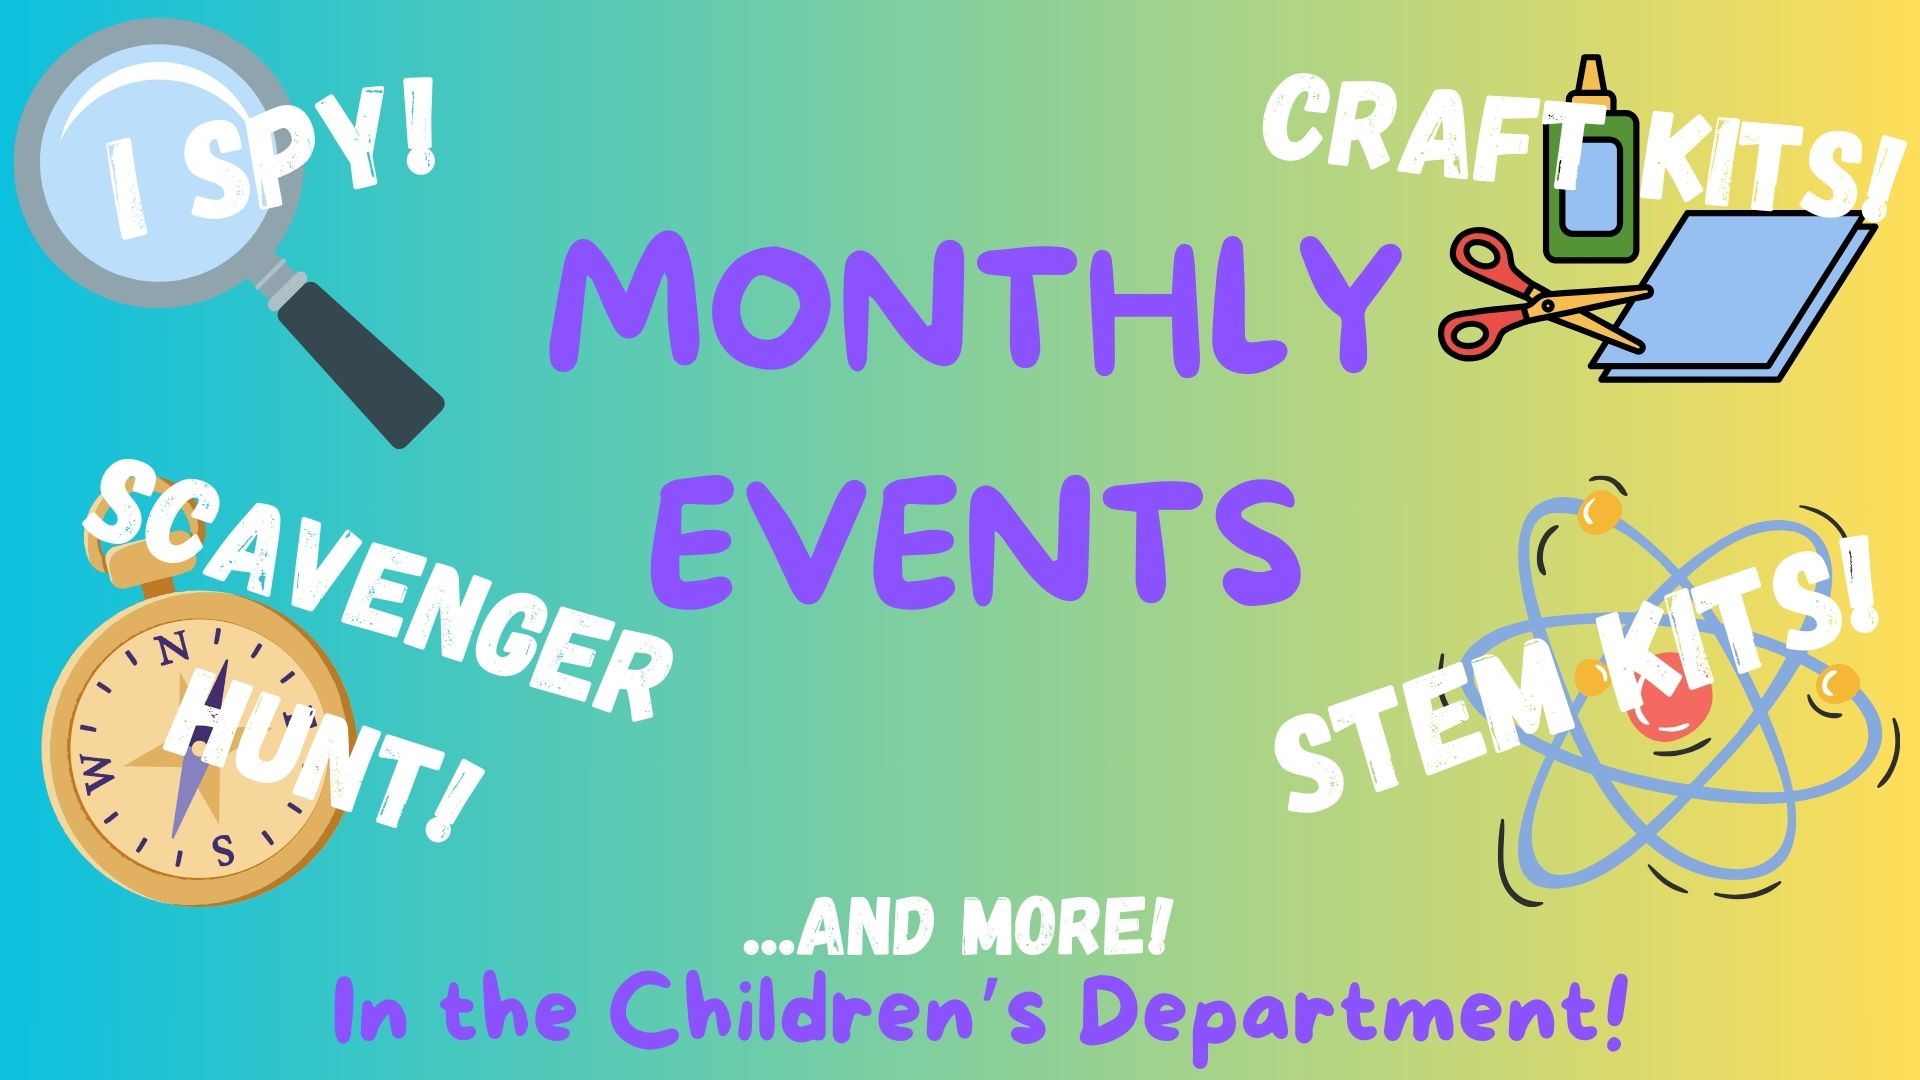 Monthly Events:  I Spy, Craft Kits, Scavenger Hunt, STEM kits, and more!  No registration.  In the children's department.